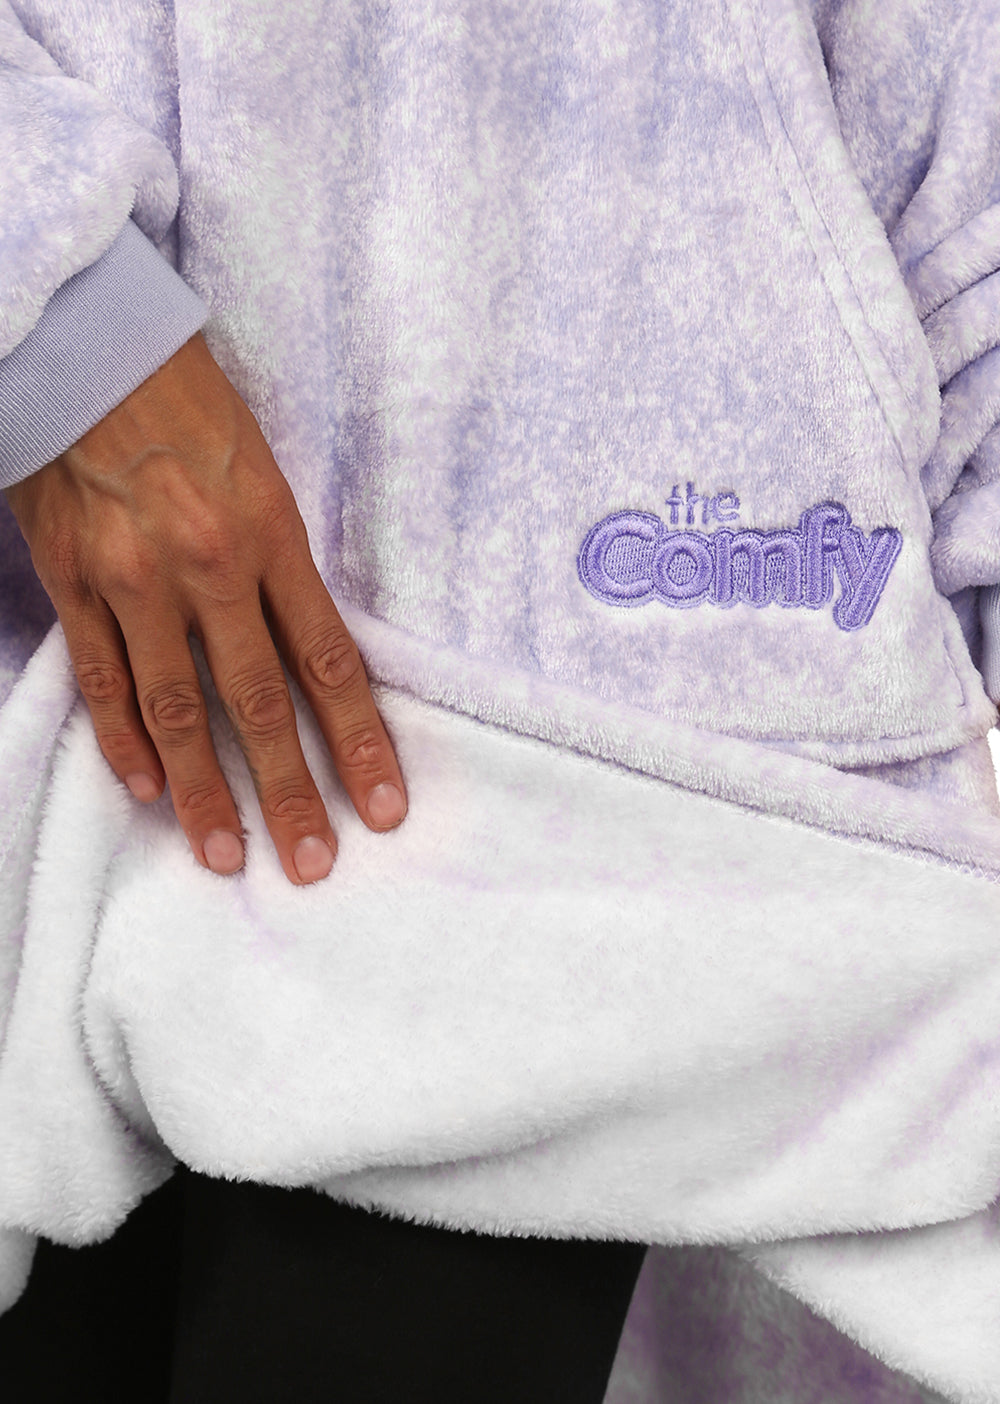  THE COMFY Dream  Oversized Light Microfiber Wearable